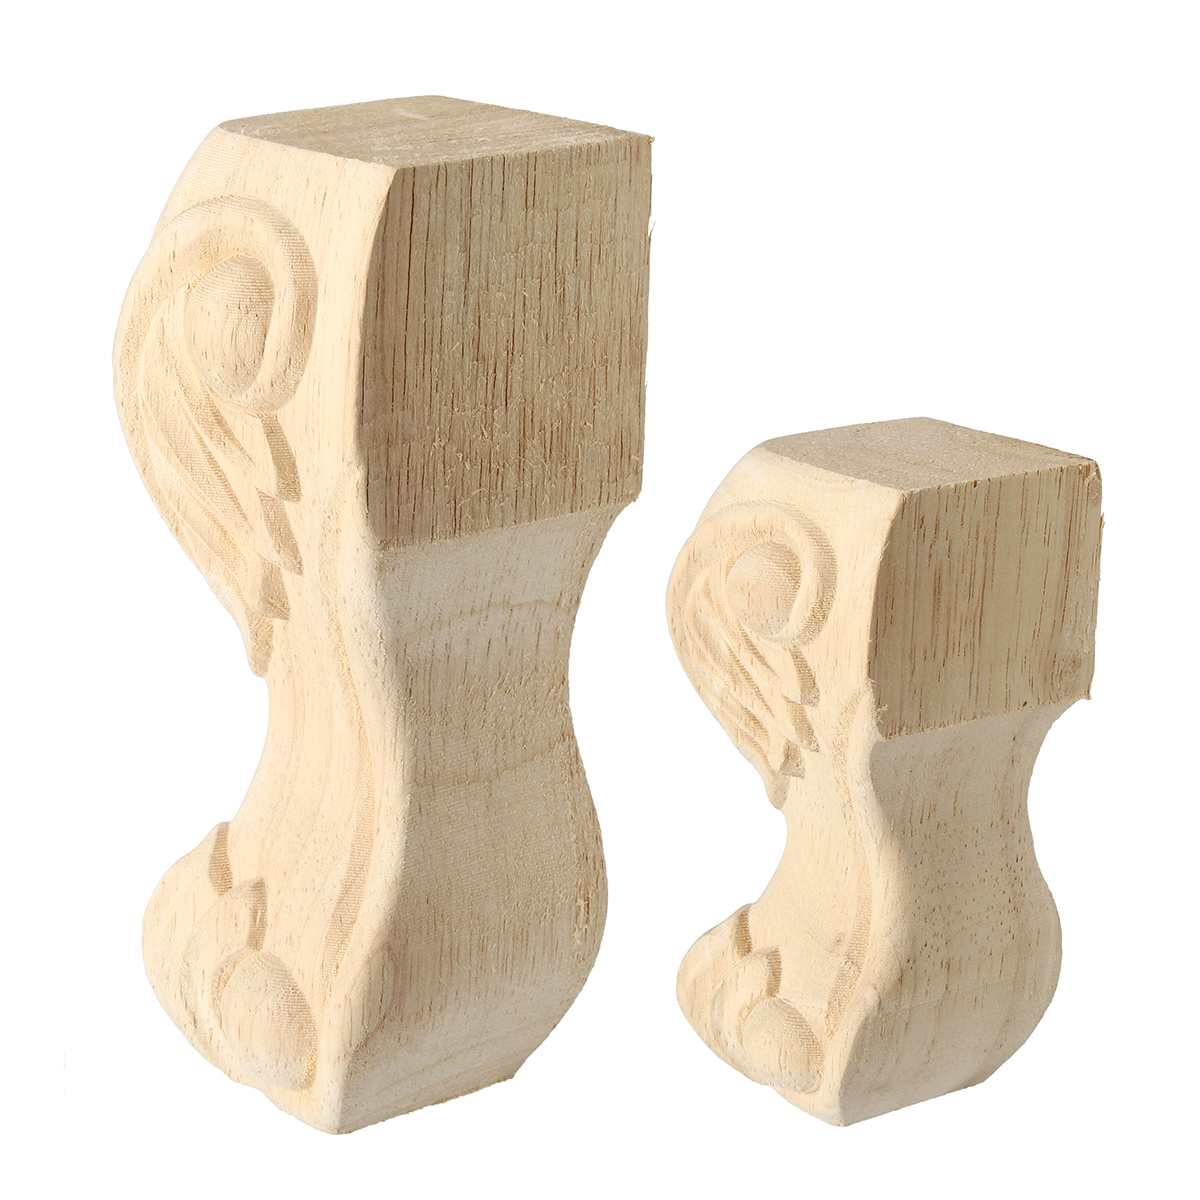 4Pcs-1015cm-European-Solid-Wood-Carving-Furniture-Foot-Legs-Unpainted-Table-Cabinet-Feets-1322663-2